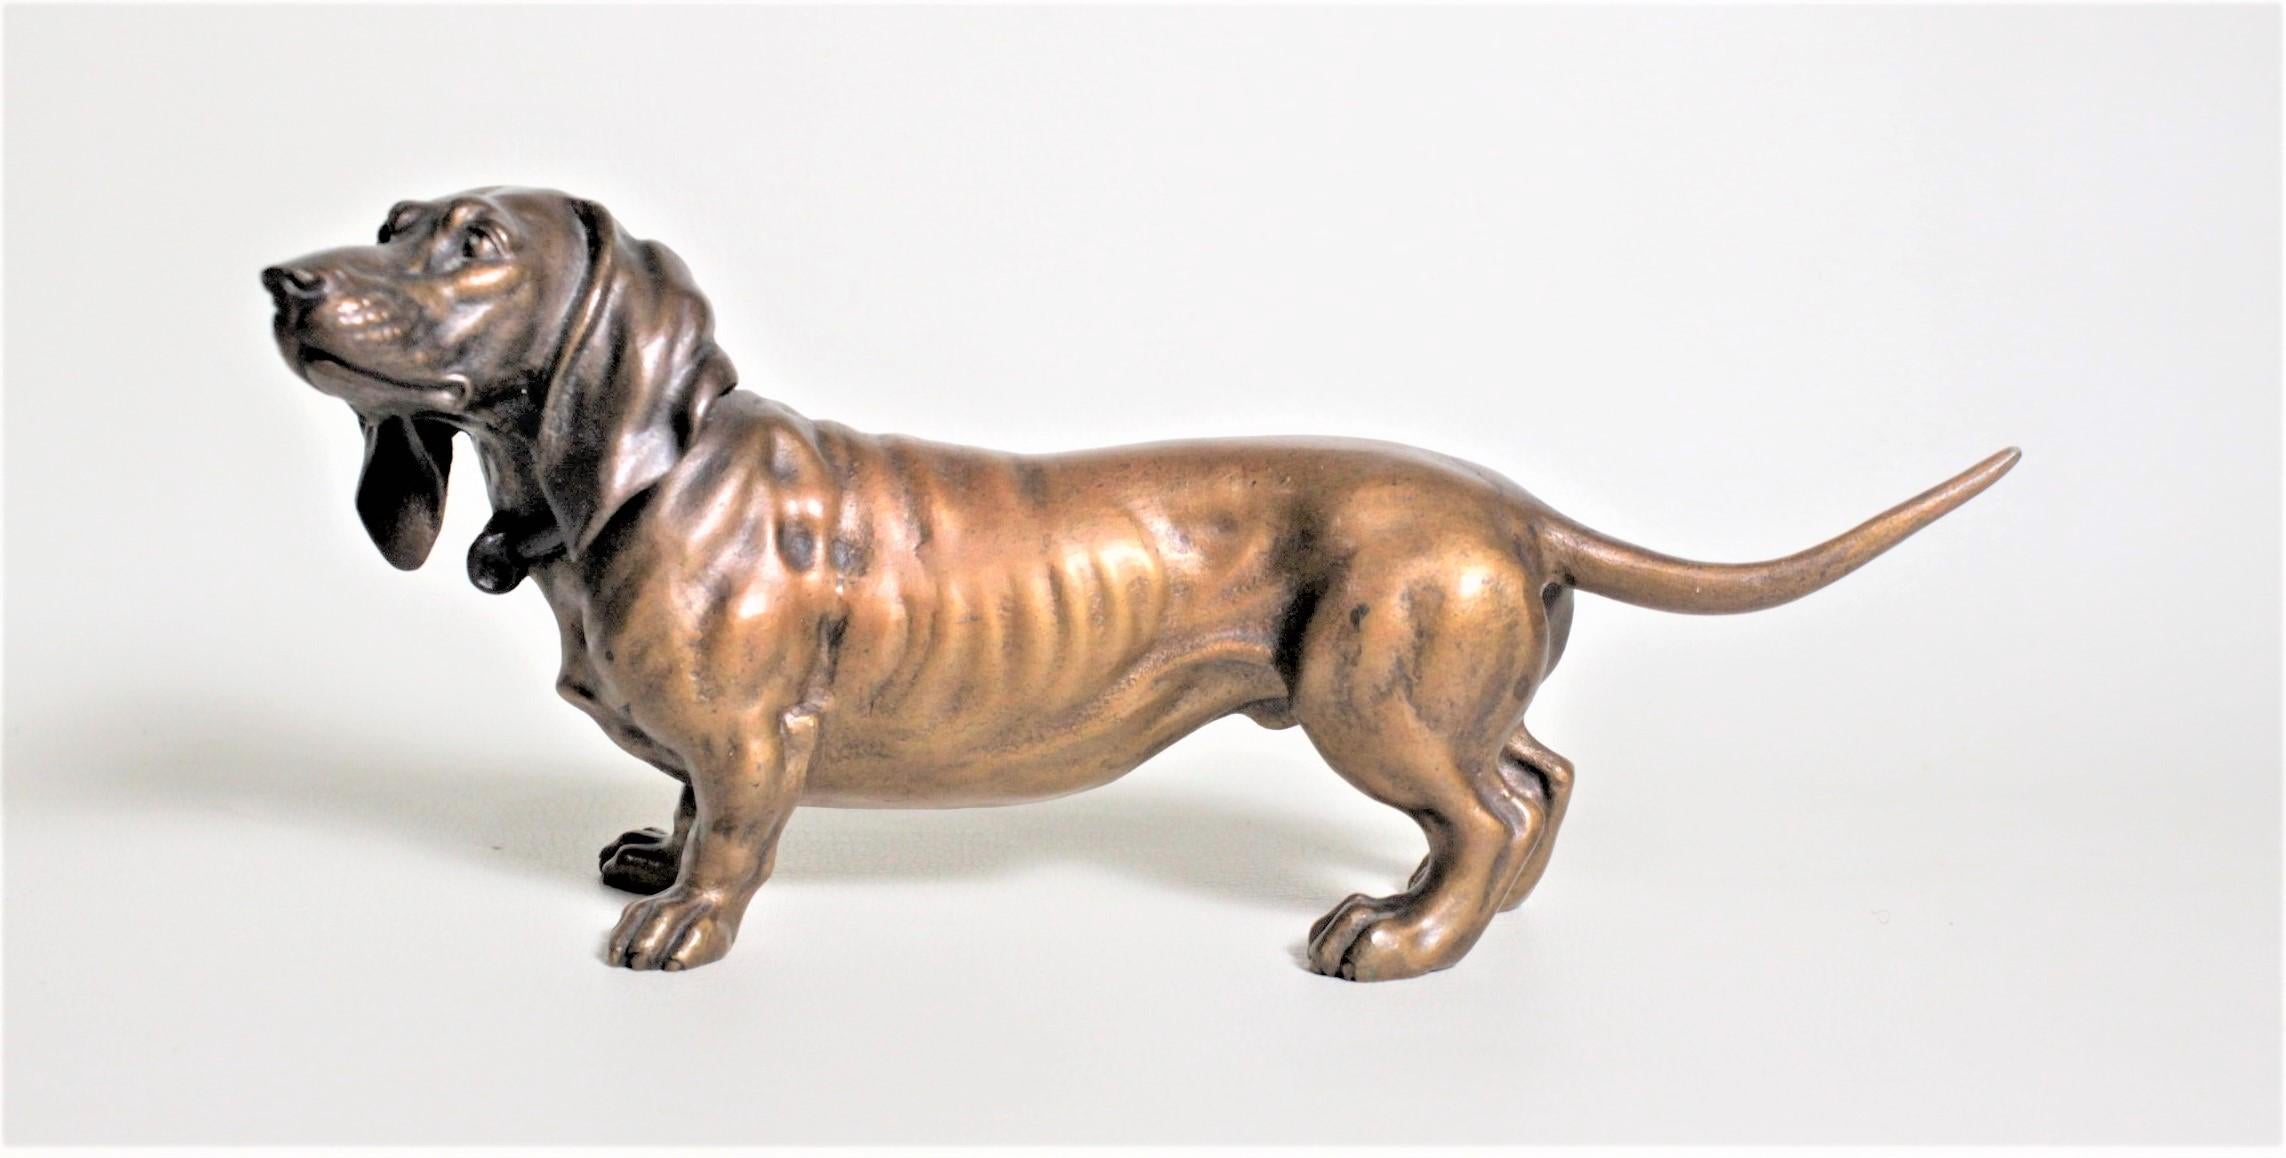 This antique cast and cold-painted bronze sculpture is unsigned but presumed to have been made in Austria in circa 1900. This well executed cast bronze study depicts a basset hound in a very realistic and detailed manner from all sides which has